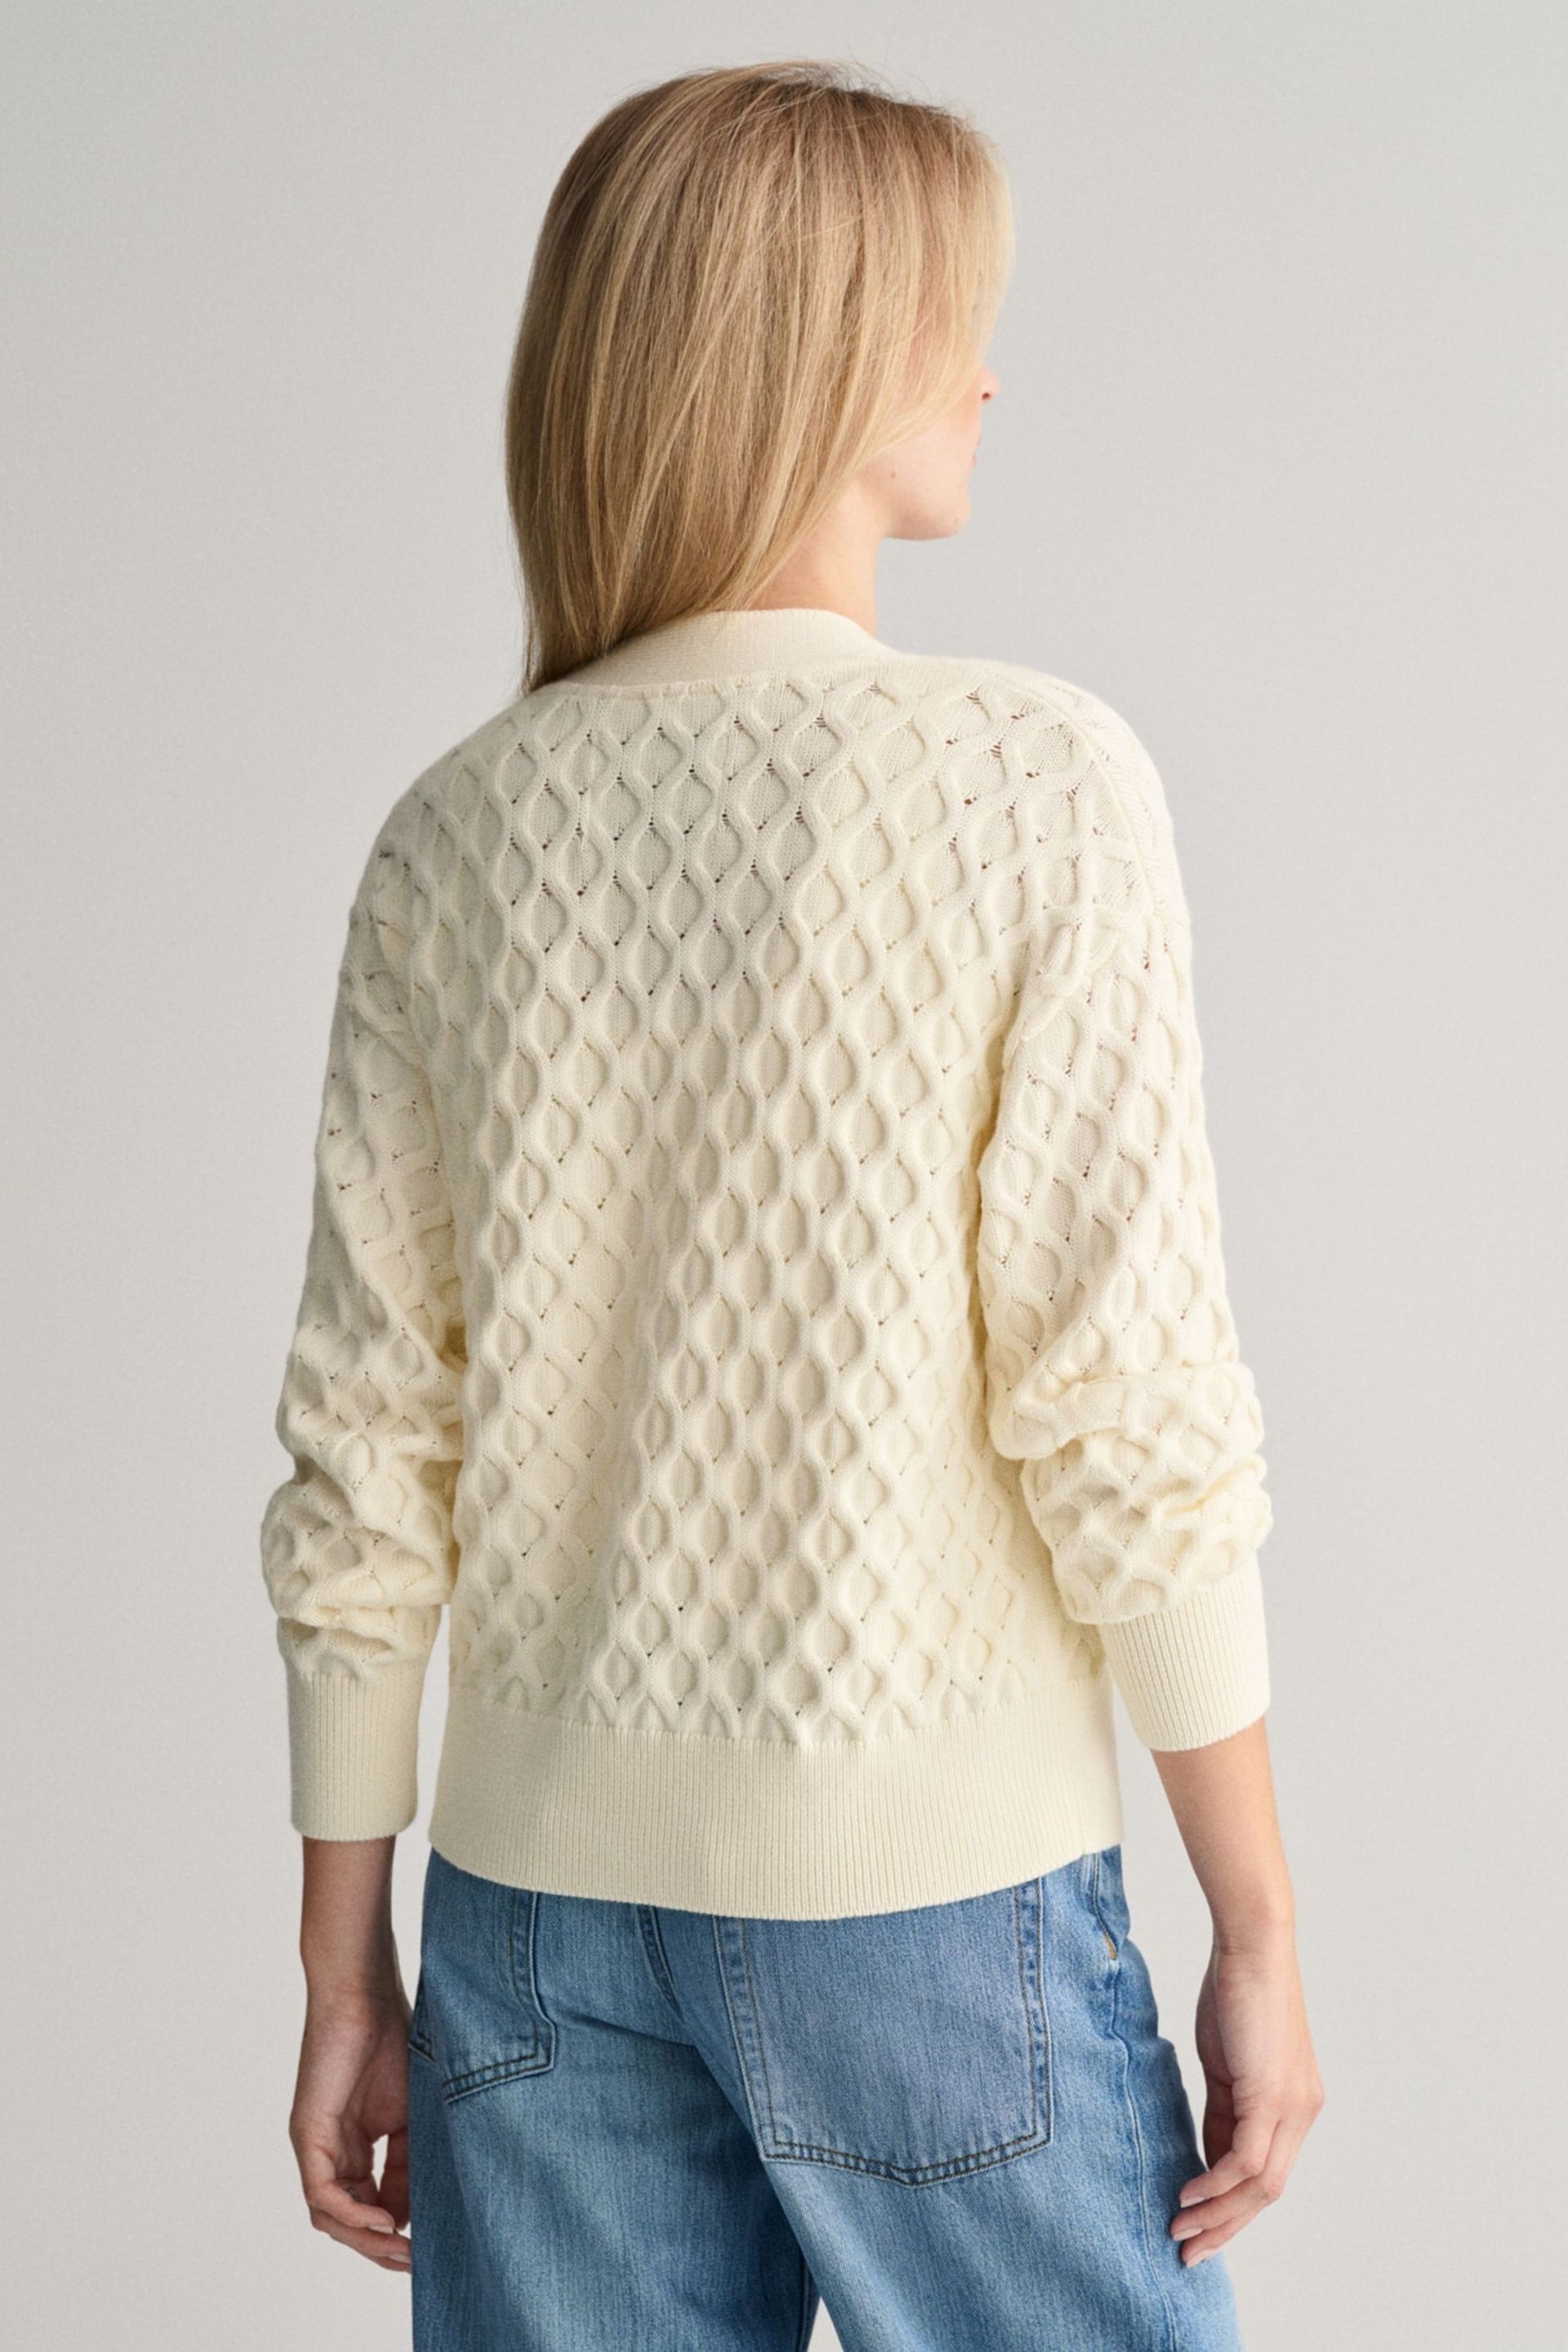 GANT Cream Textured Knit Relaxed Cotton Cardigan - Image 2 of 5